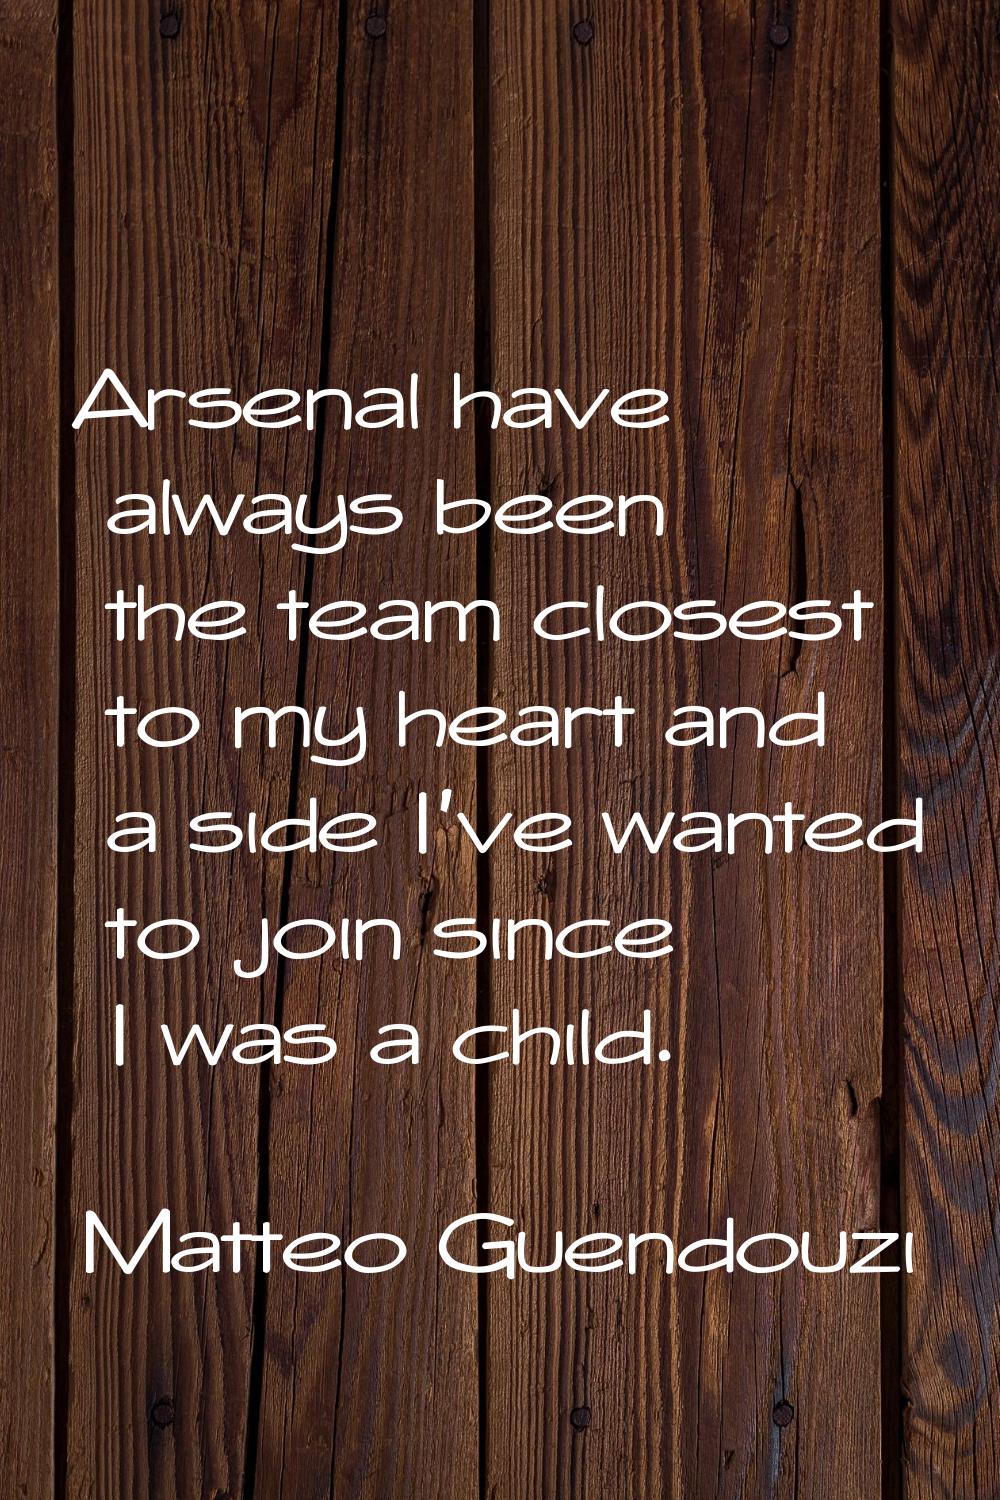 Arsenal have always been the team closest to my heart and a side I've wanted to join since I was a 